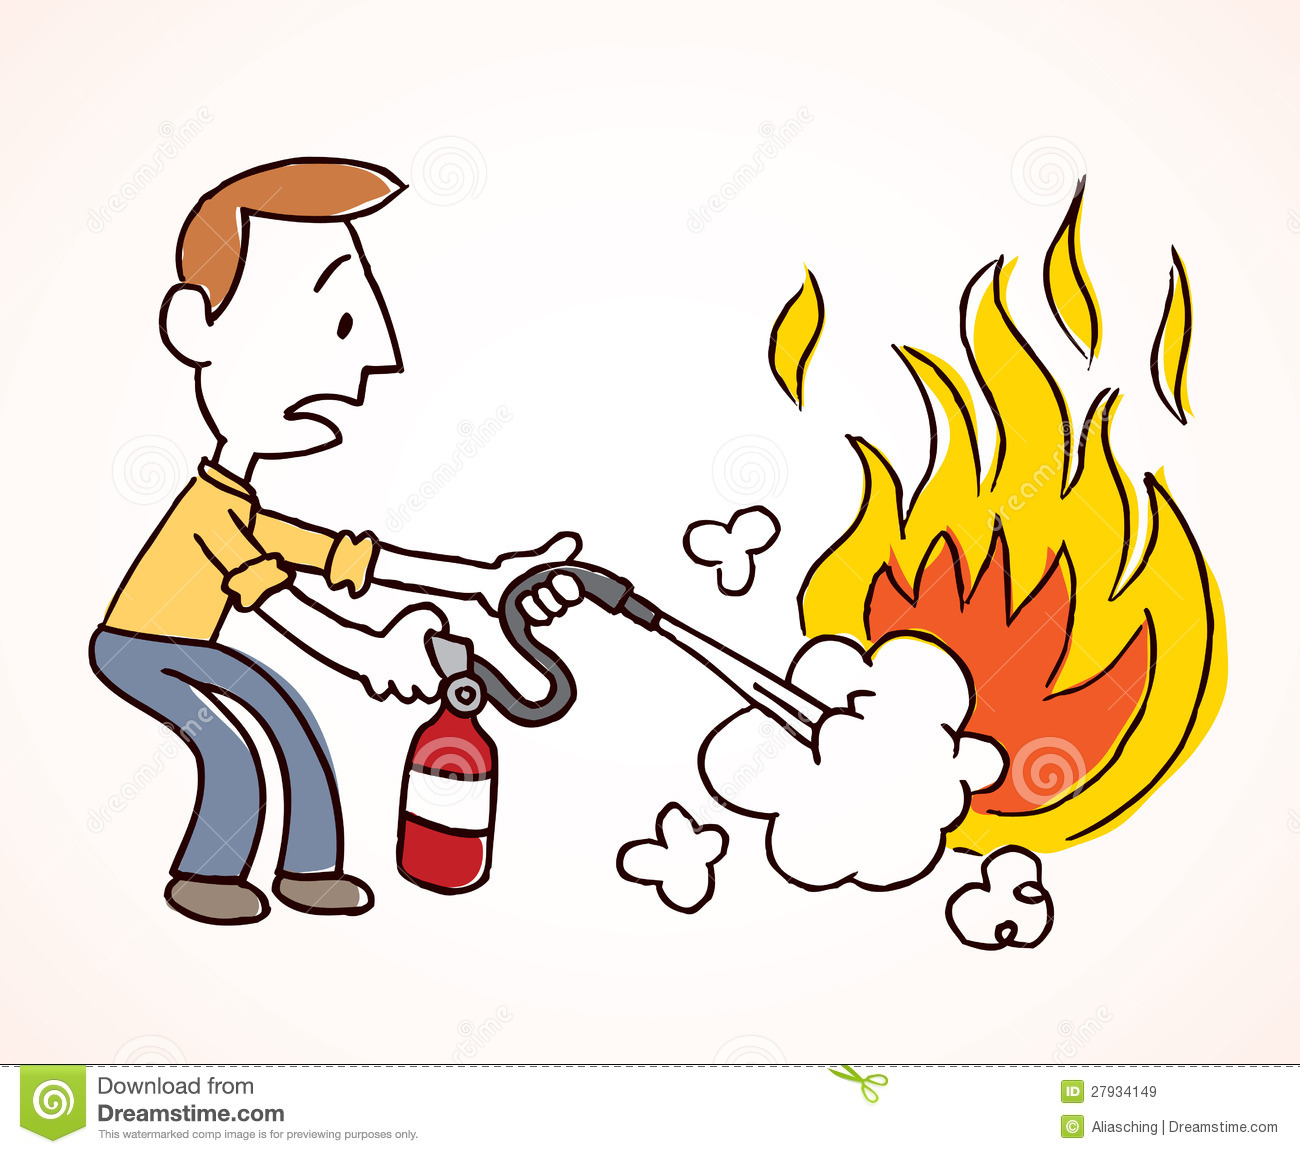 Fire Extinguisher Cartoon   Clipart Panda   Free Clipart Images